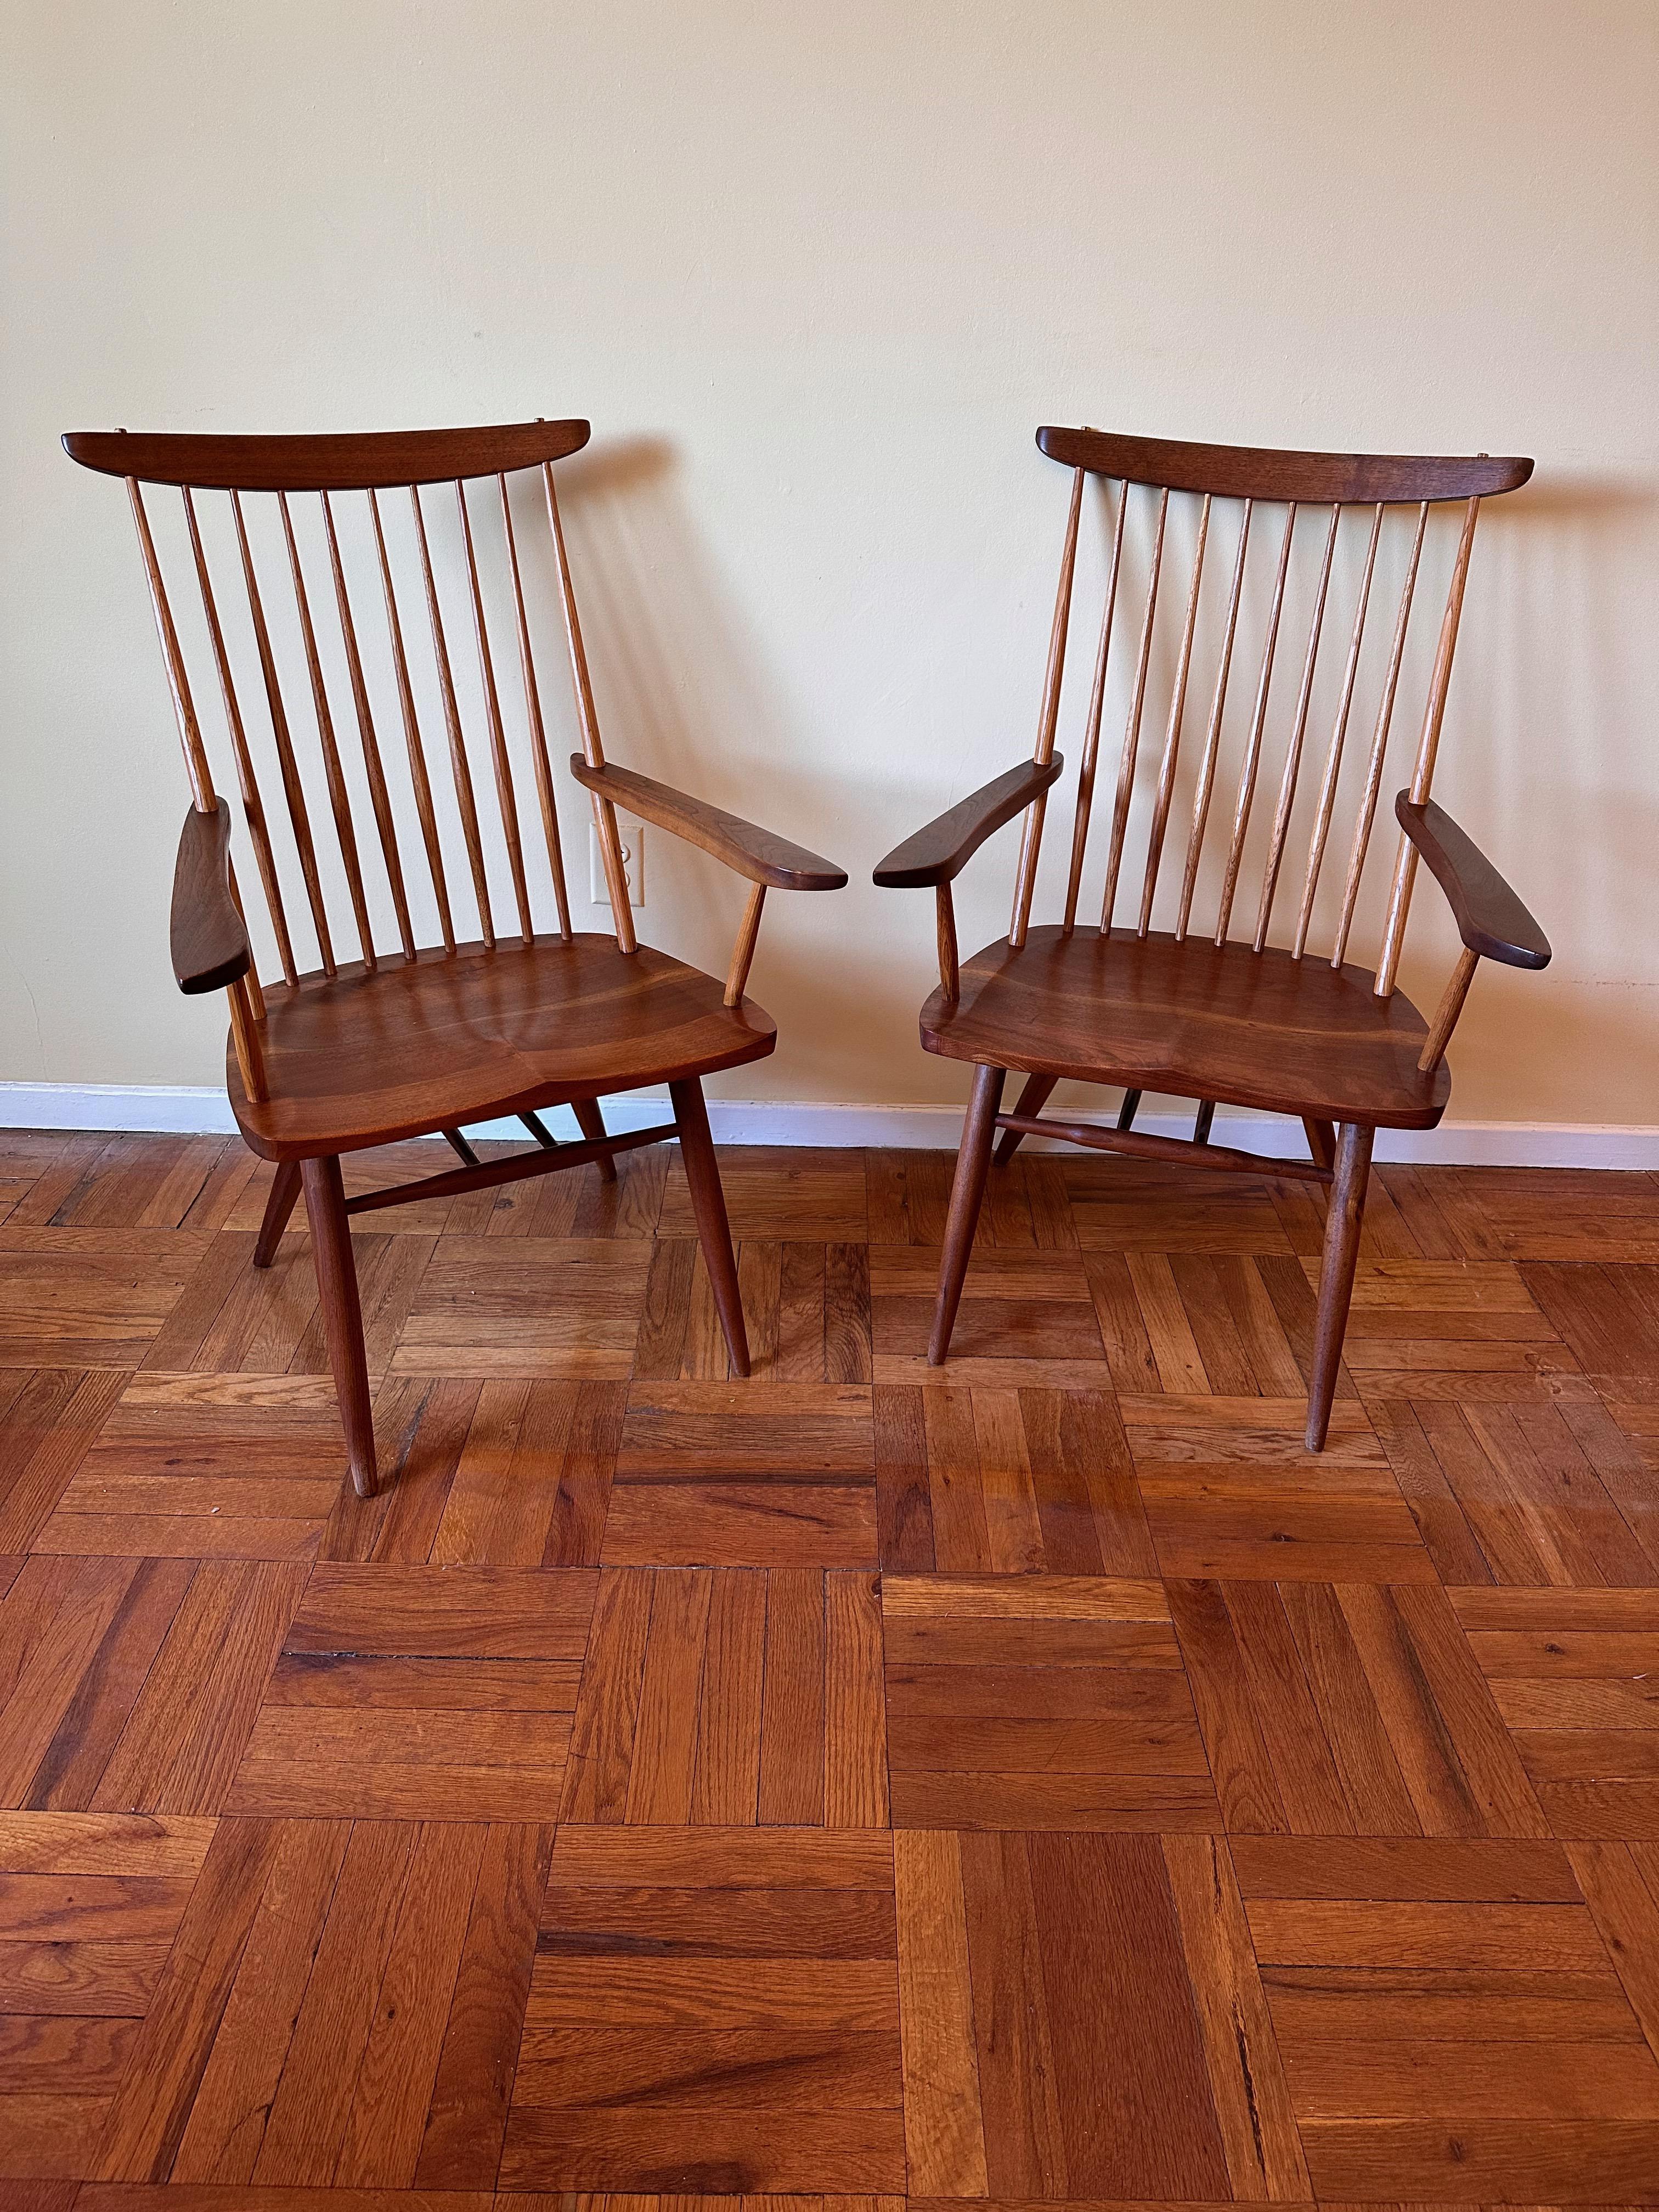 Set of Six New Chairs in Walnut by George Nakashima 1978 1